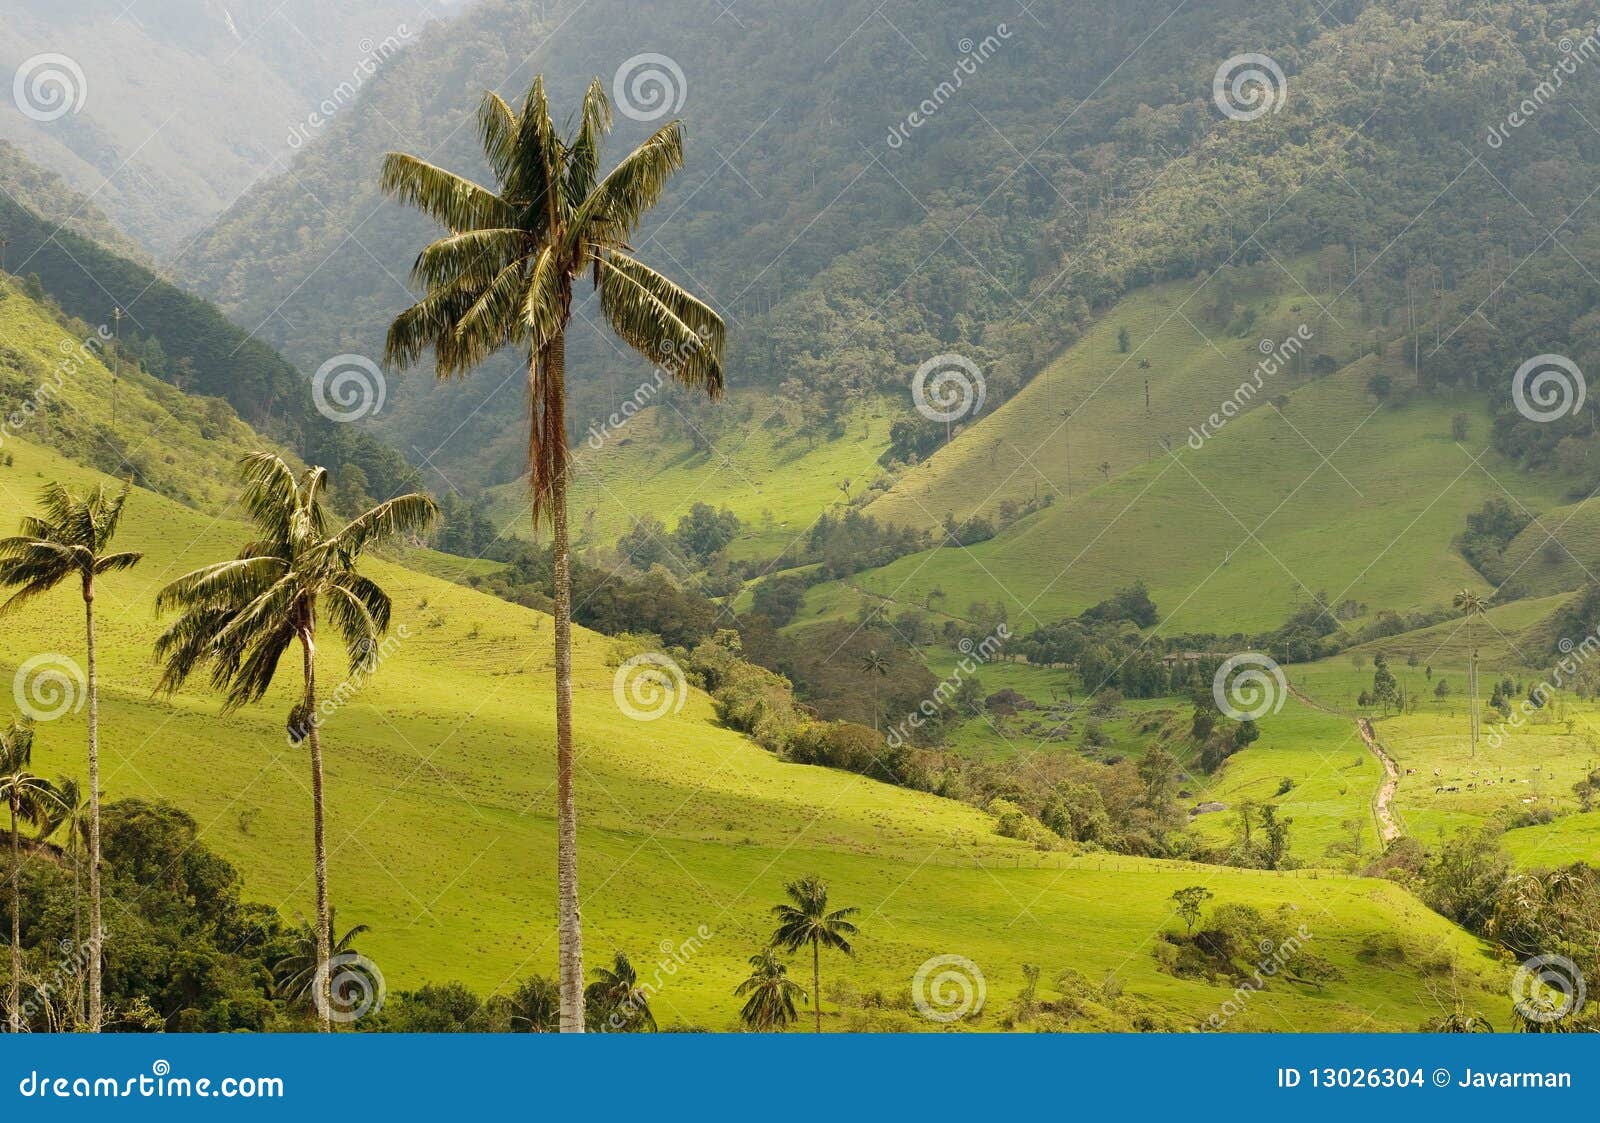 wax palm trees of cocora valley, colombia